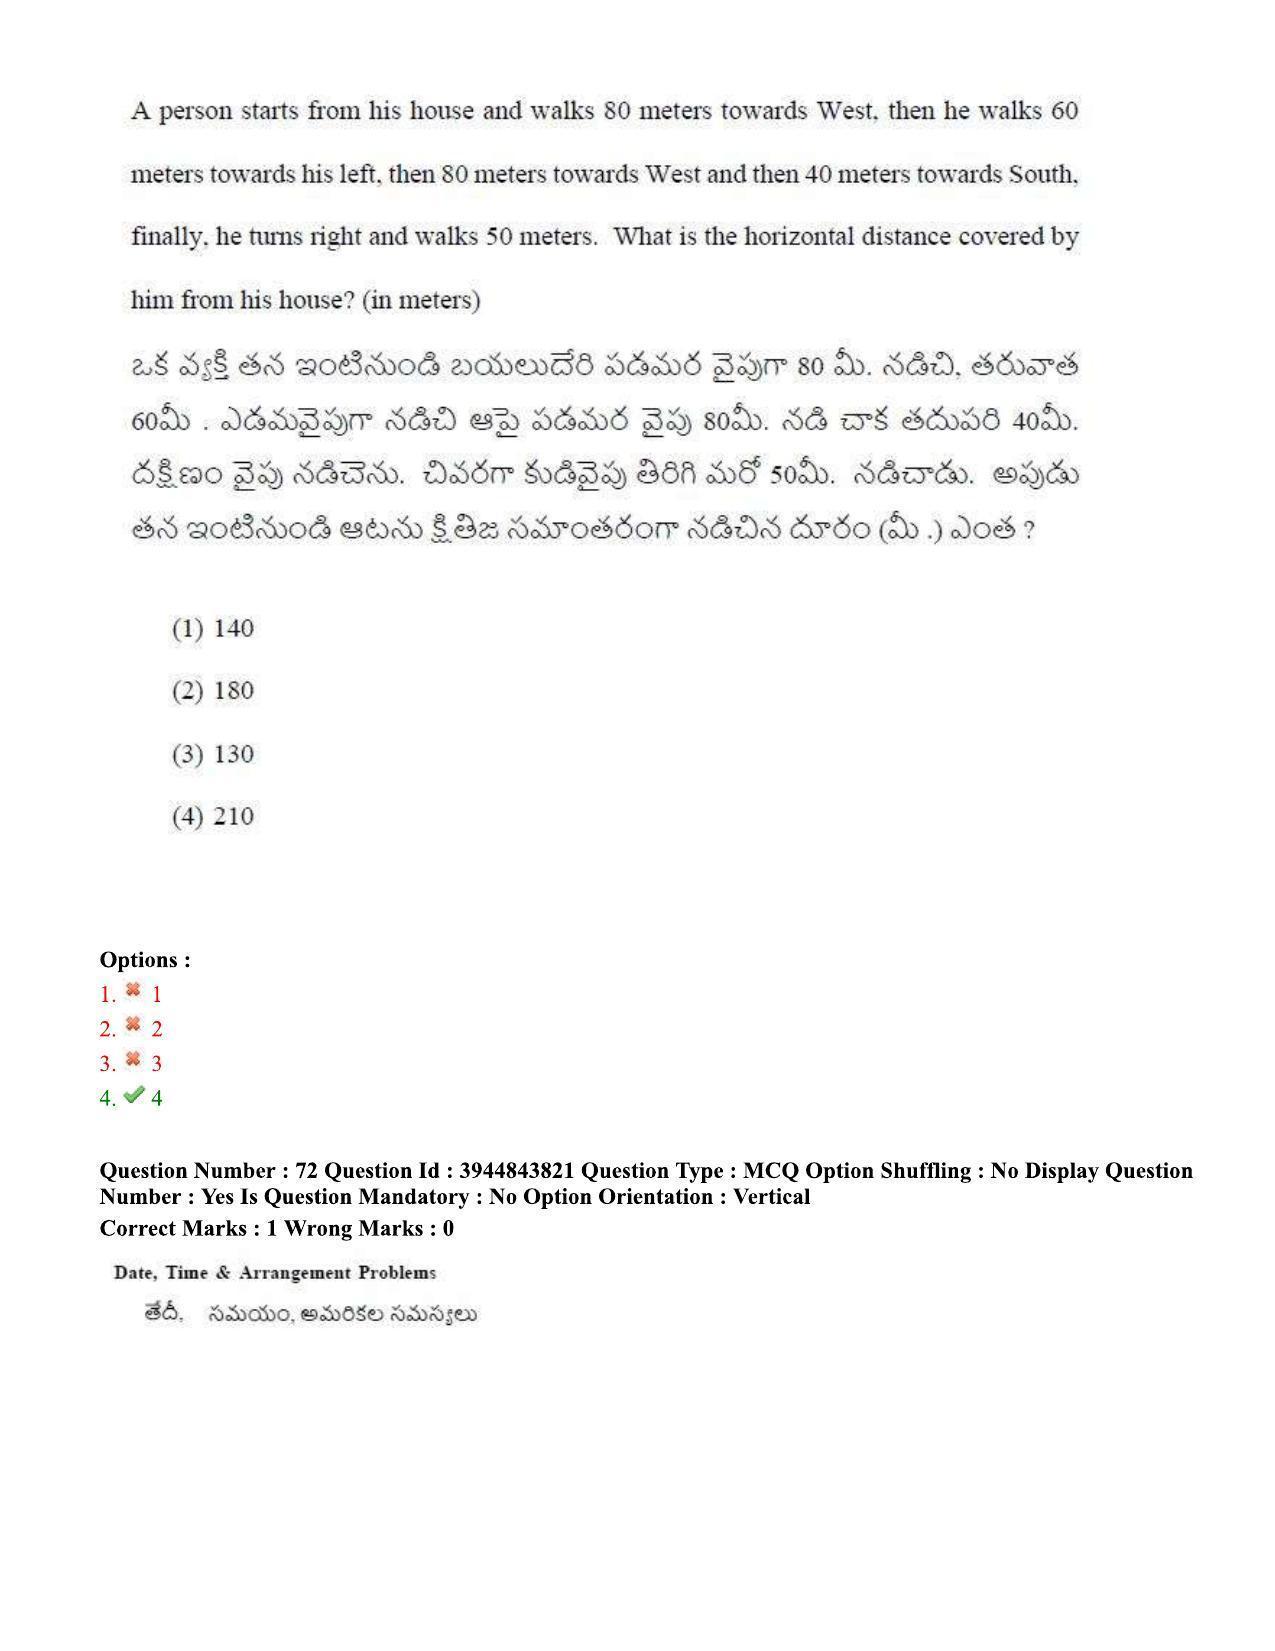 TS ICET 2020 Question Paper 1 - Oct 1, 2020	 - Page 54